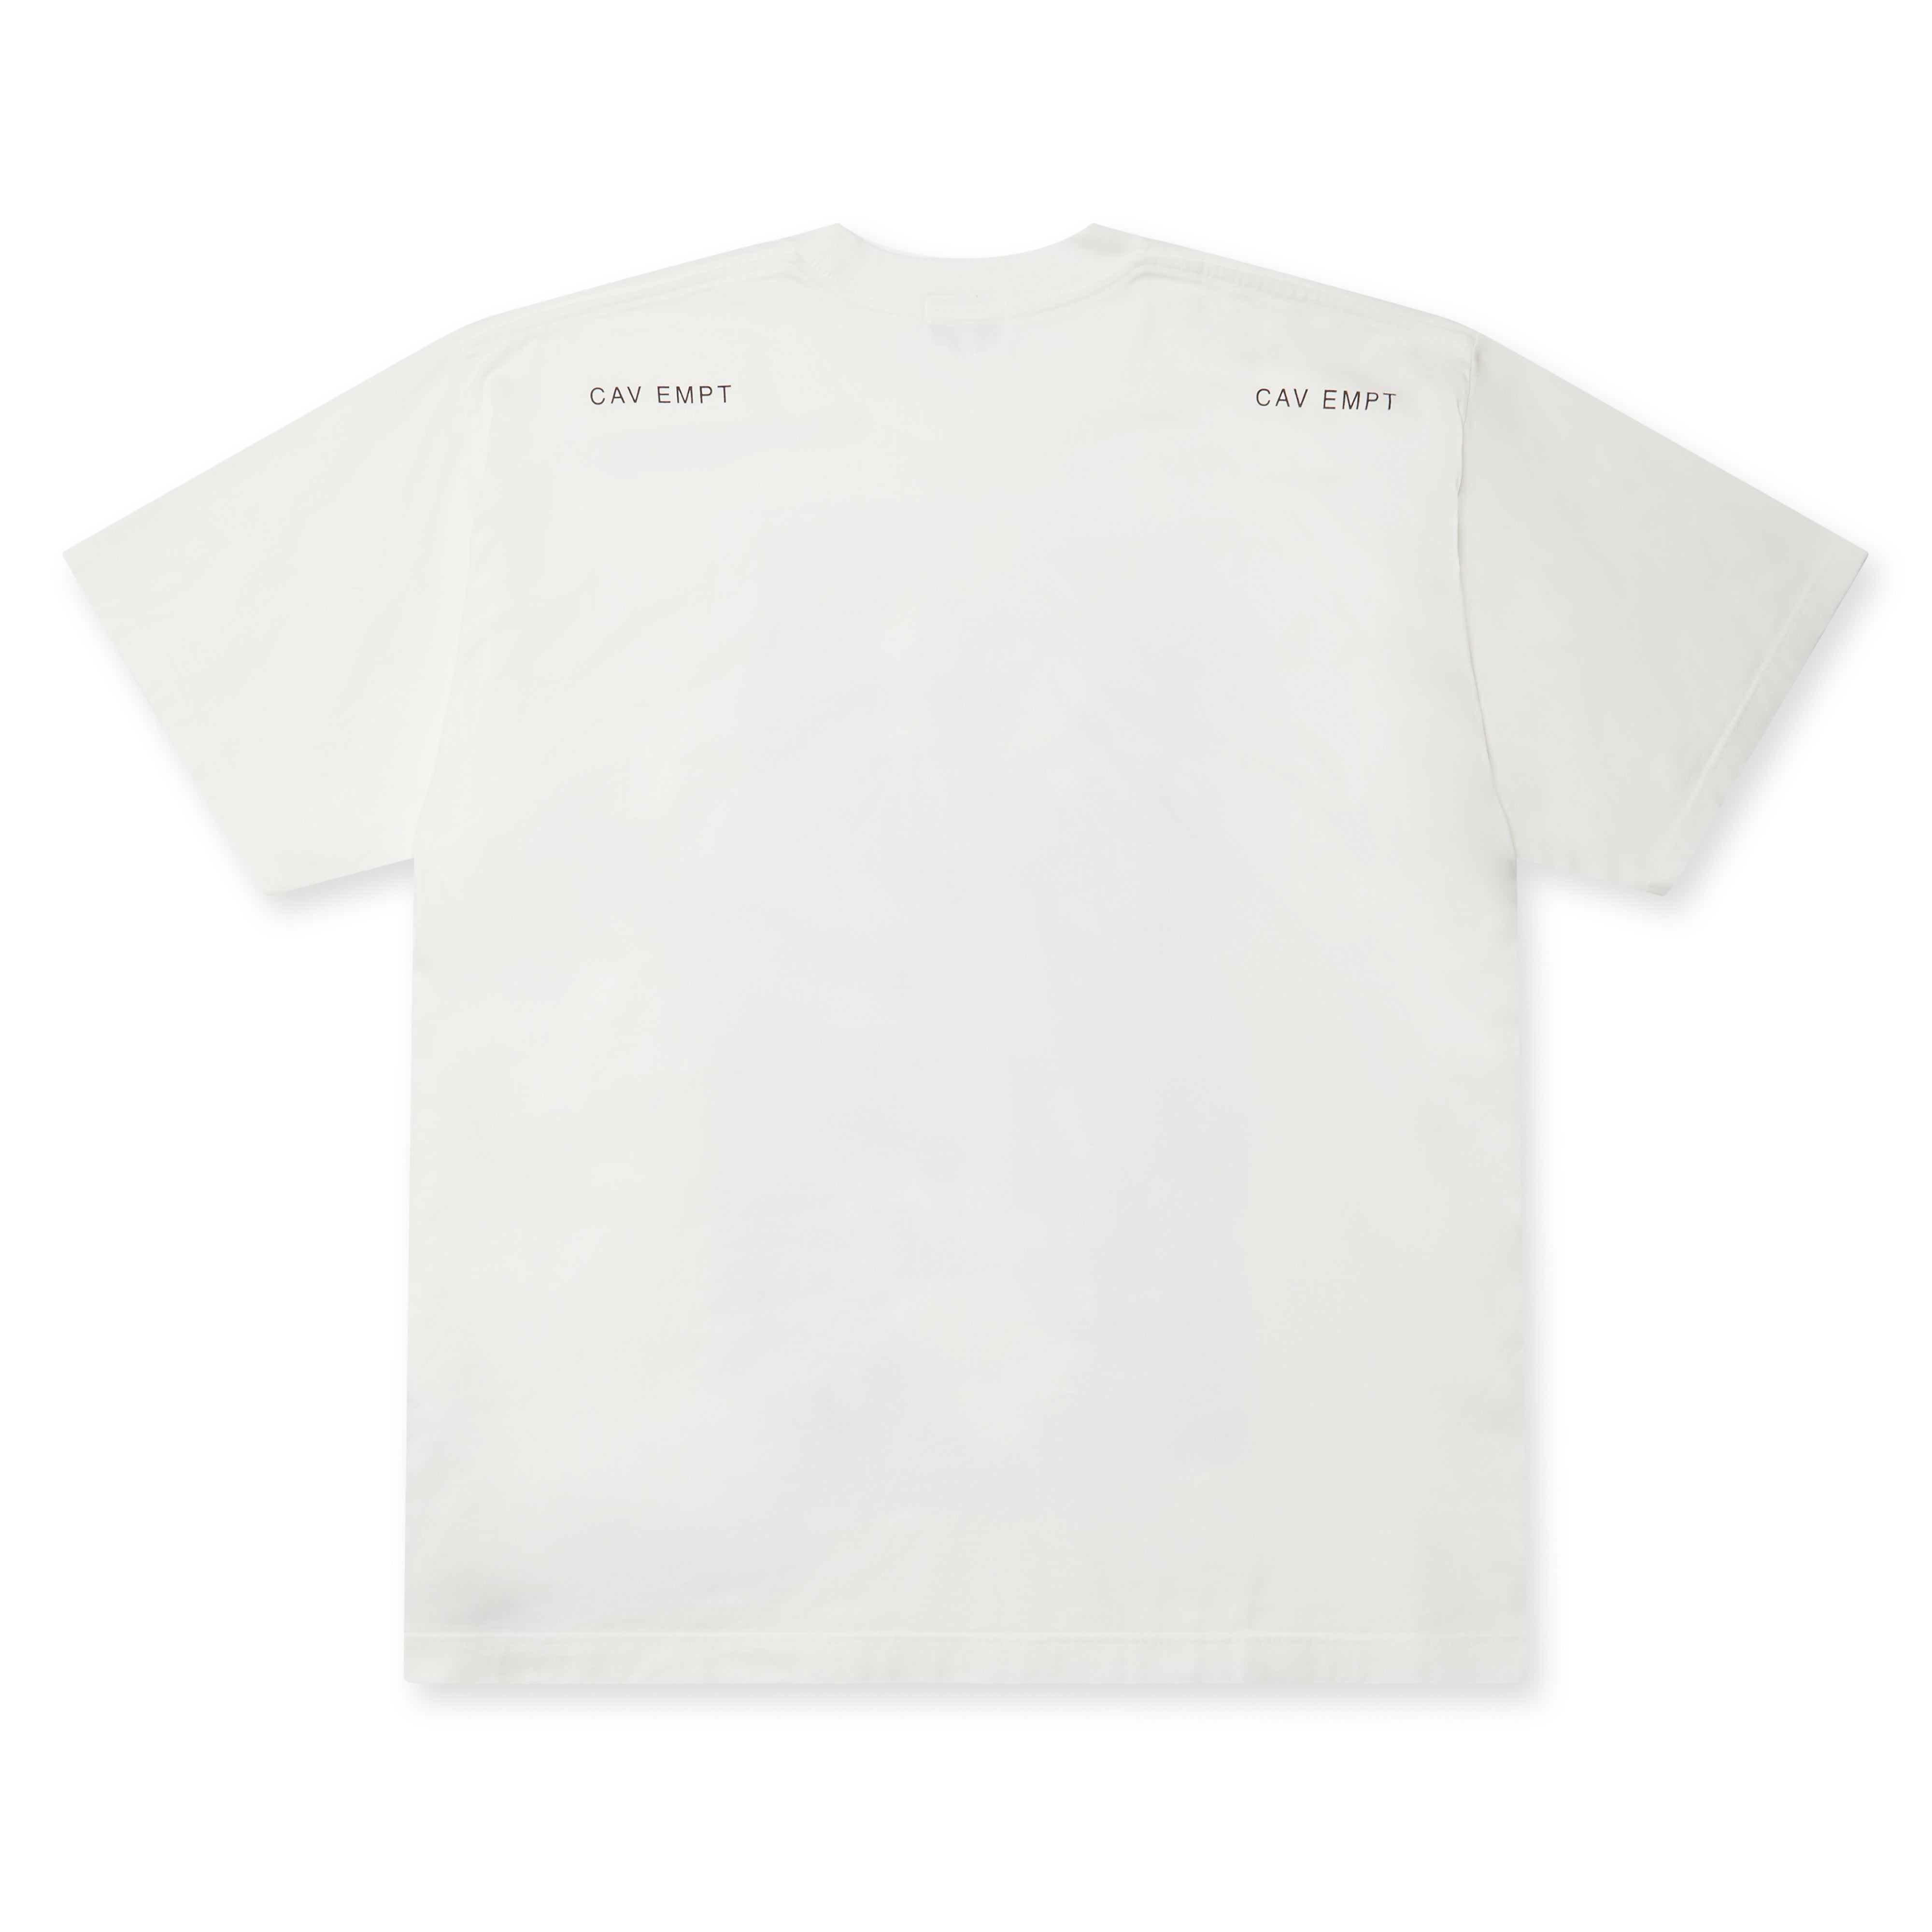 Cav Empt - Men's Md Experience Device Big T-Shirt - (White